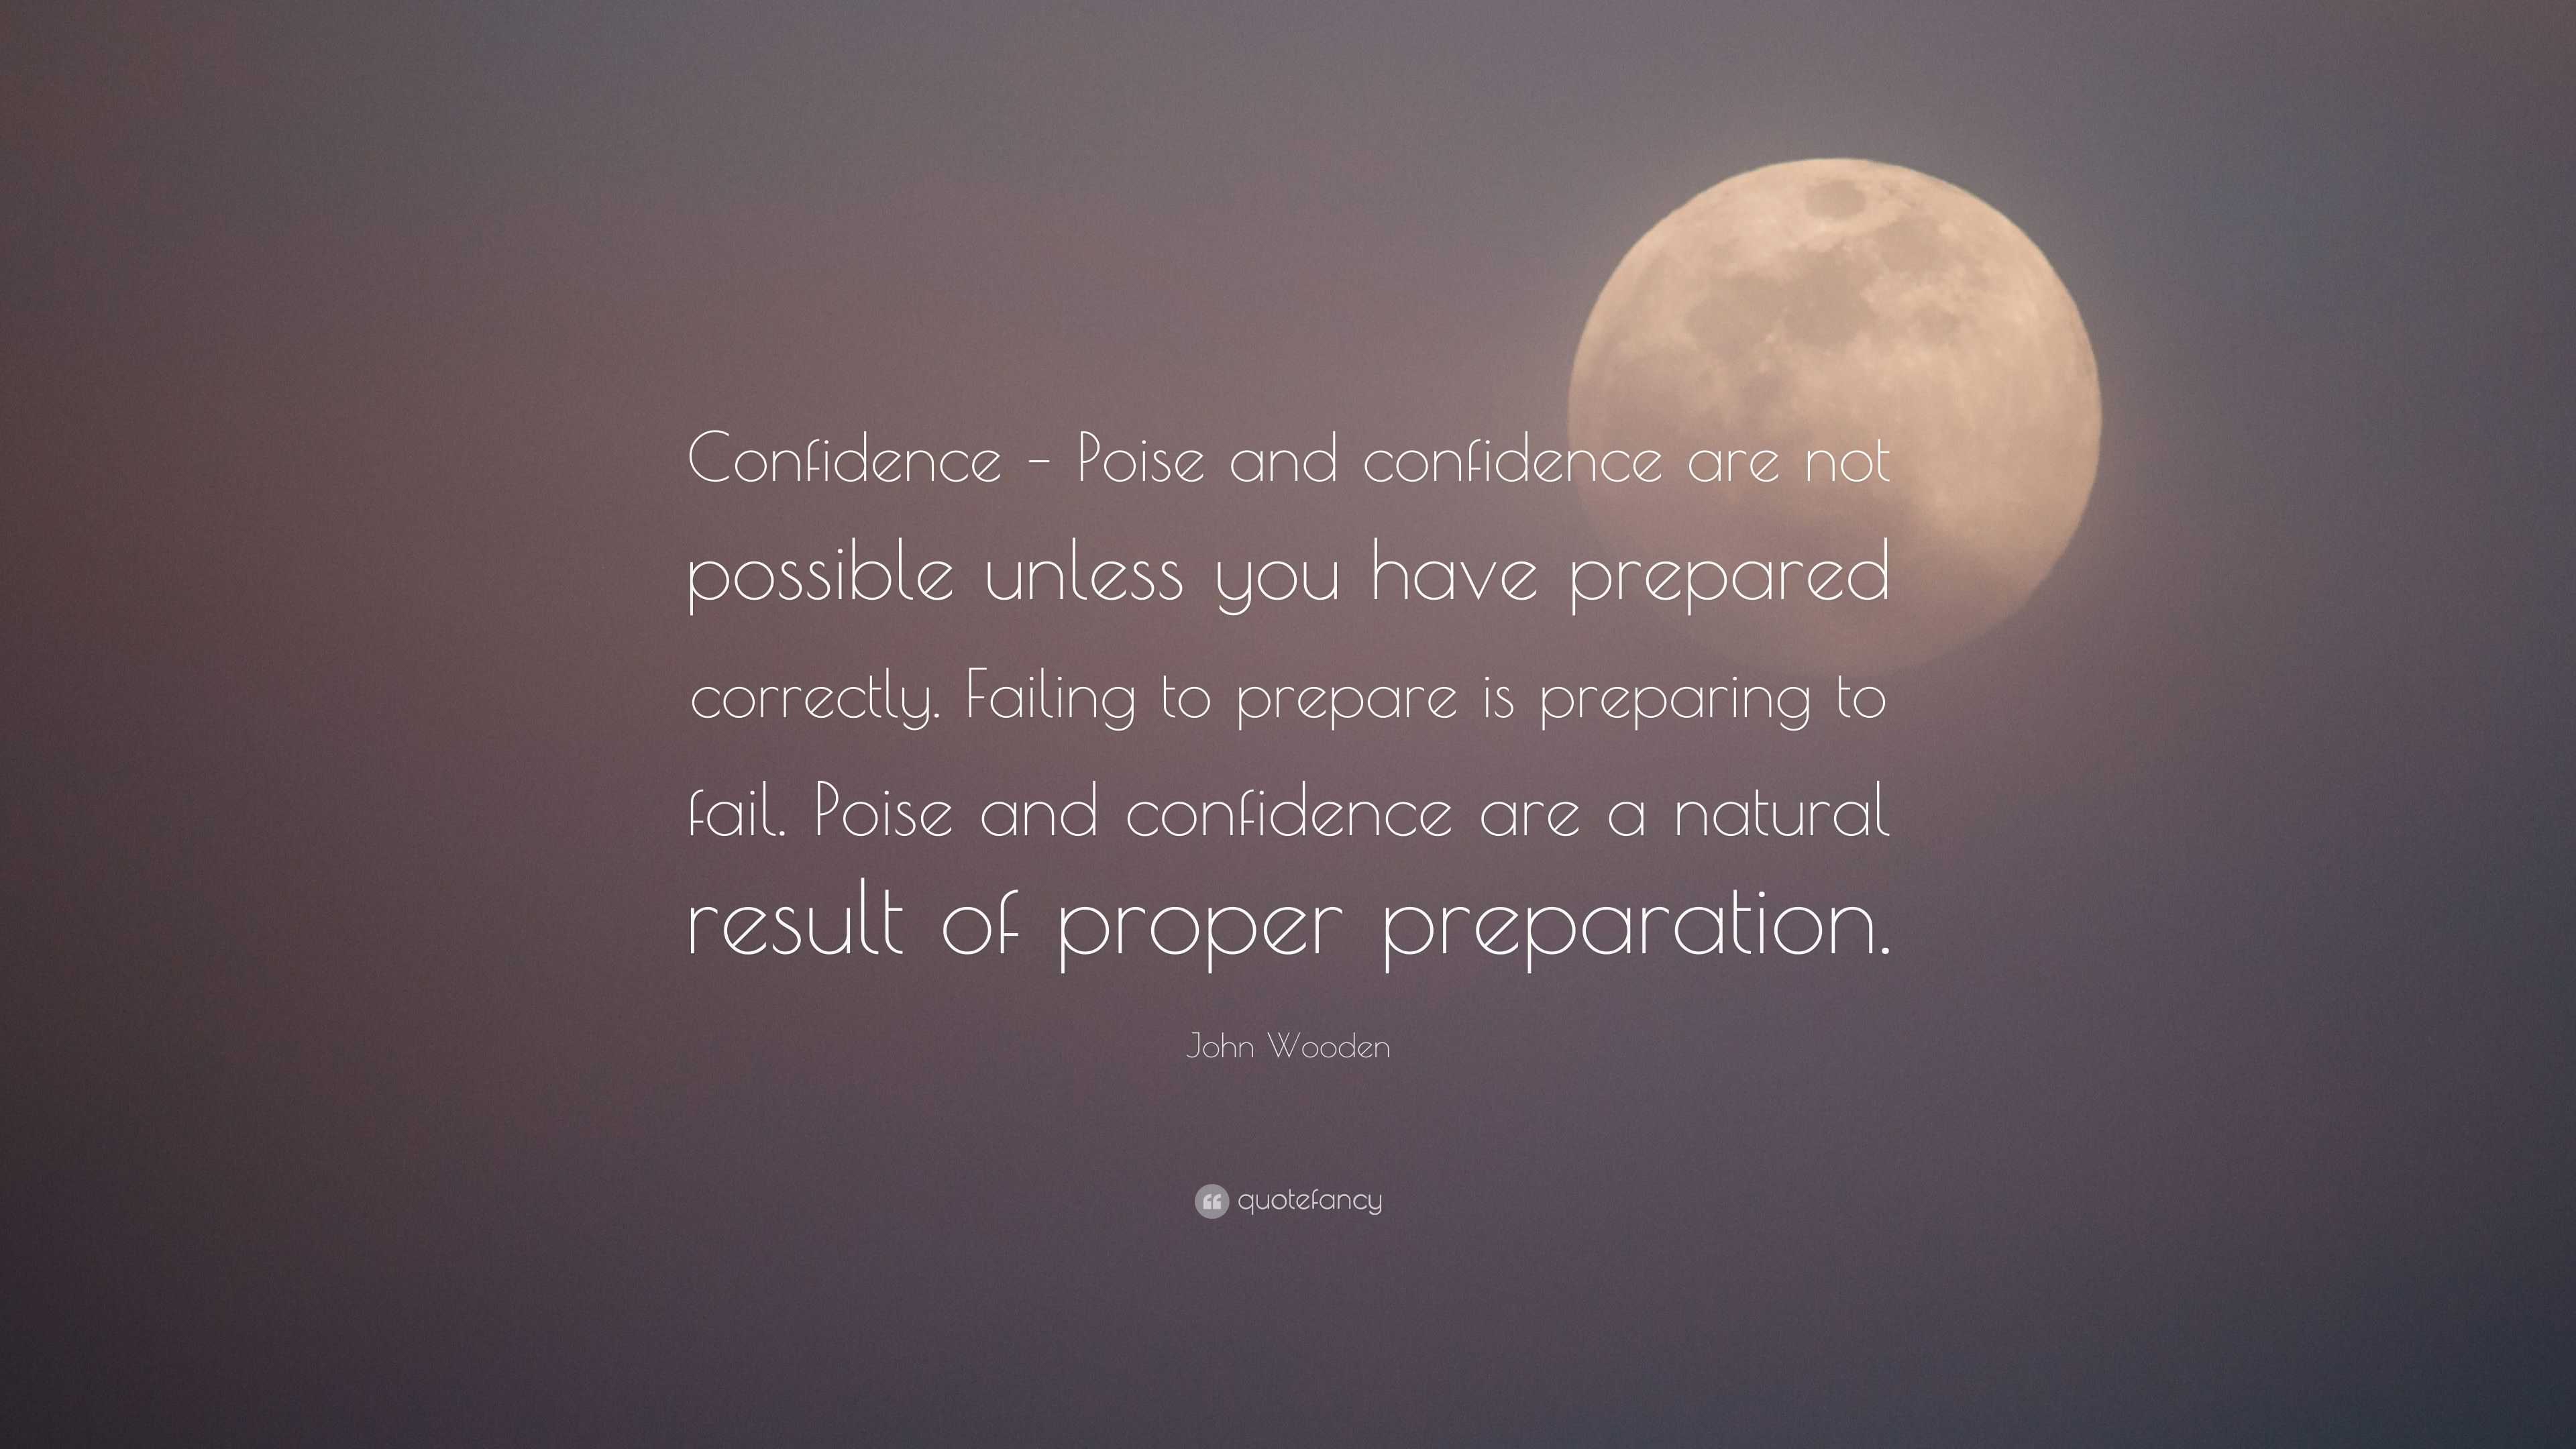 John Wooden Quote Confidence Poise And Confidence Are Not Possible Unless You Have Prepared Correctly Failing To Prepare Is Preparing T